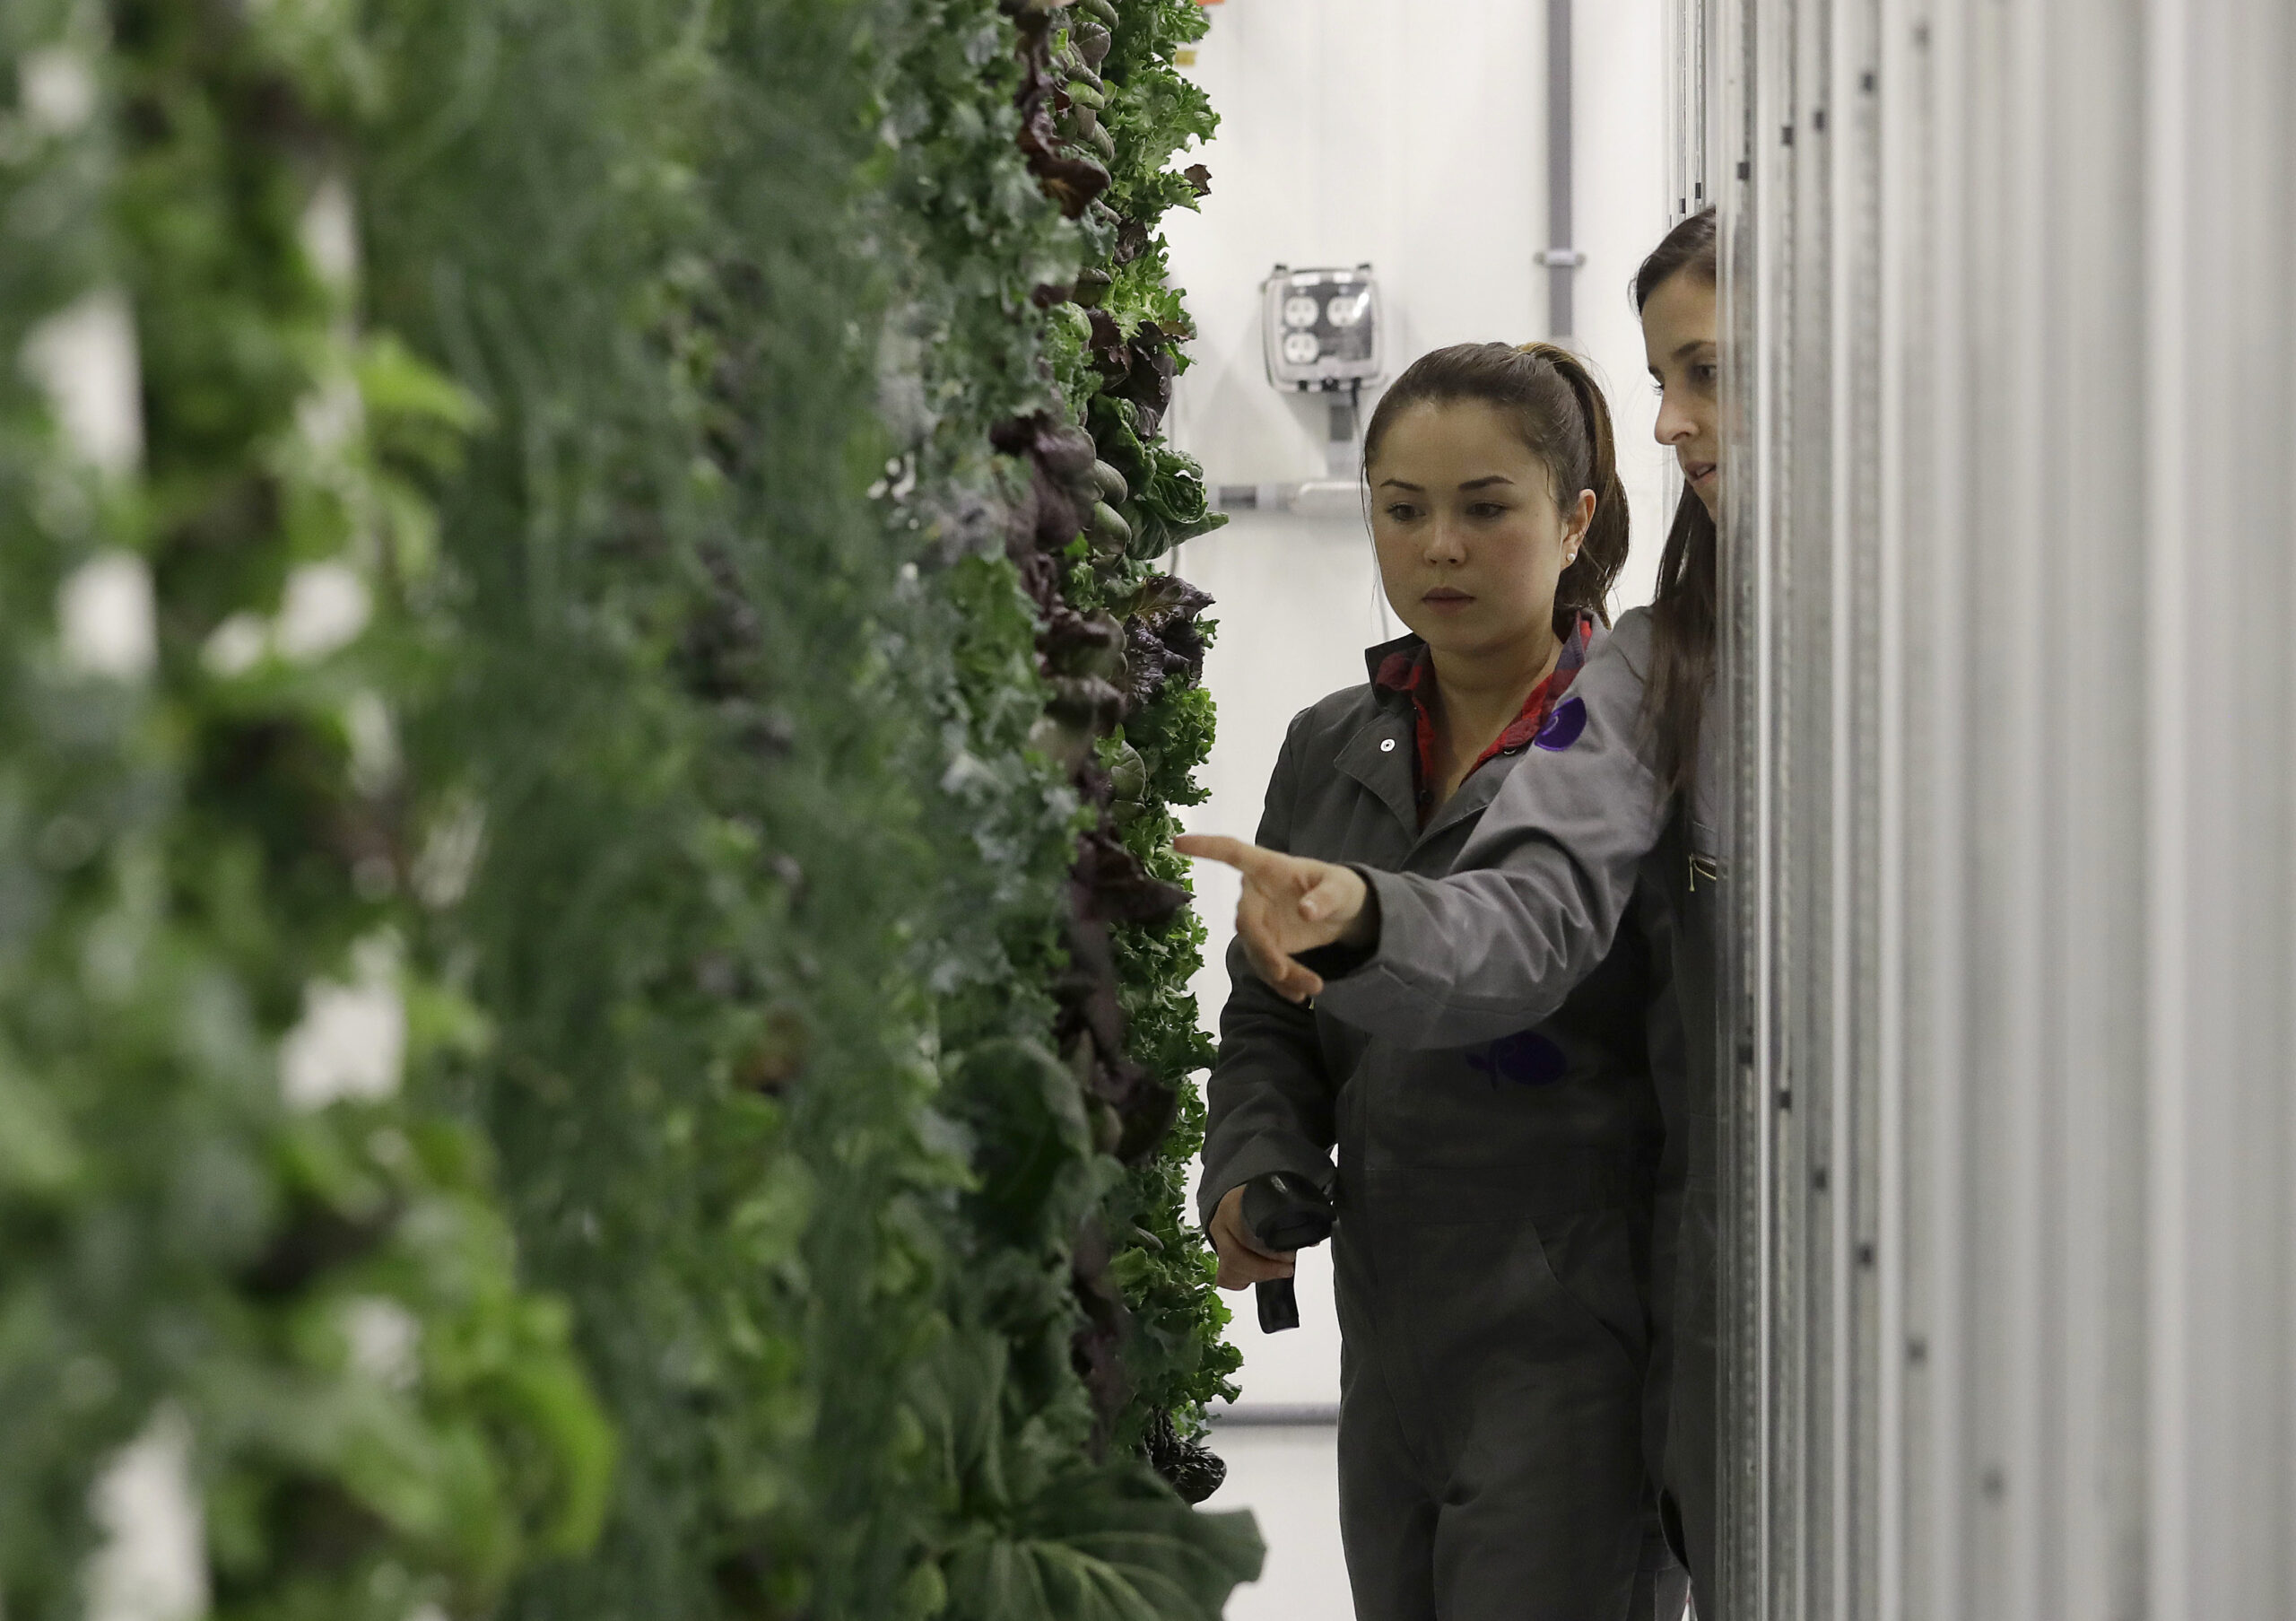 People looking at greens growing in a vertical farm